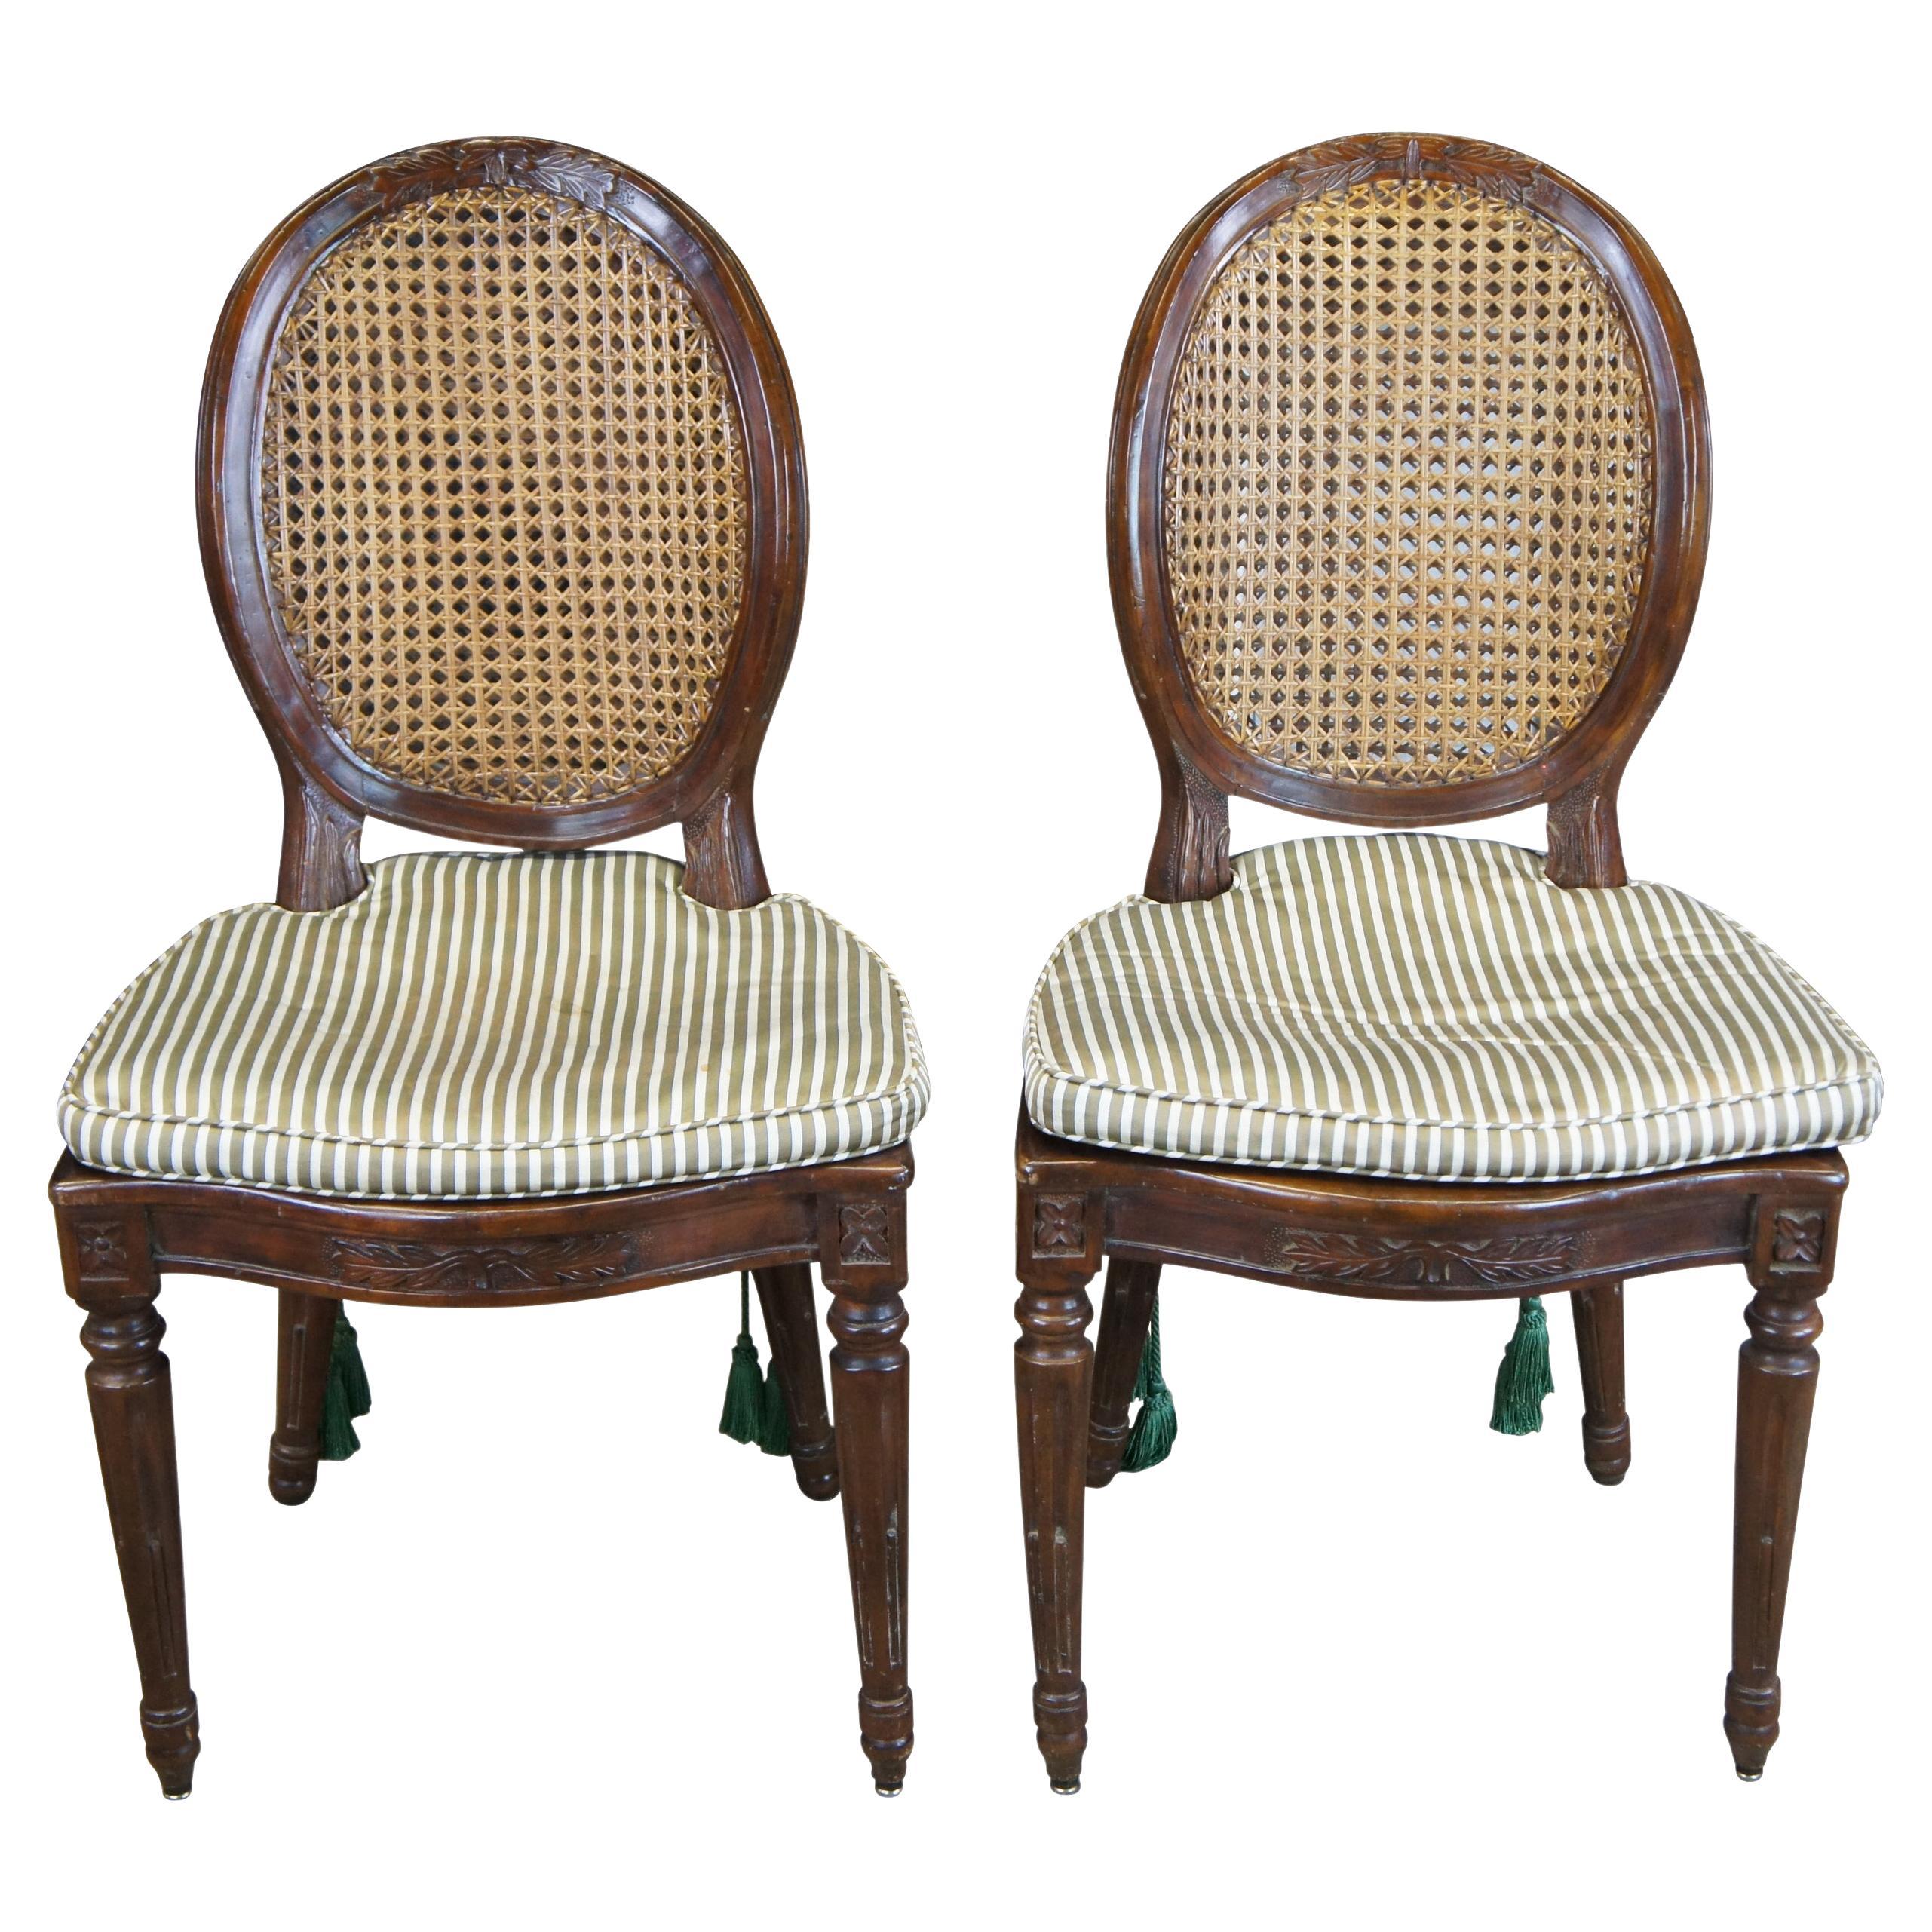 2 Antique Italian Louis XVI Walnut Caned Oval Back Dining Side Chairs Silk Seat